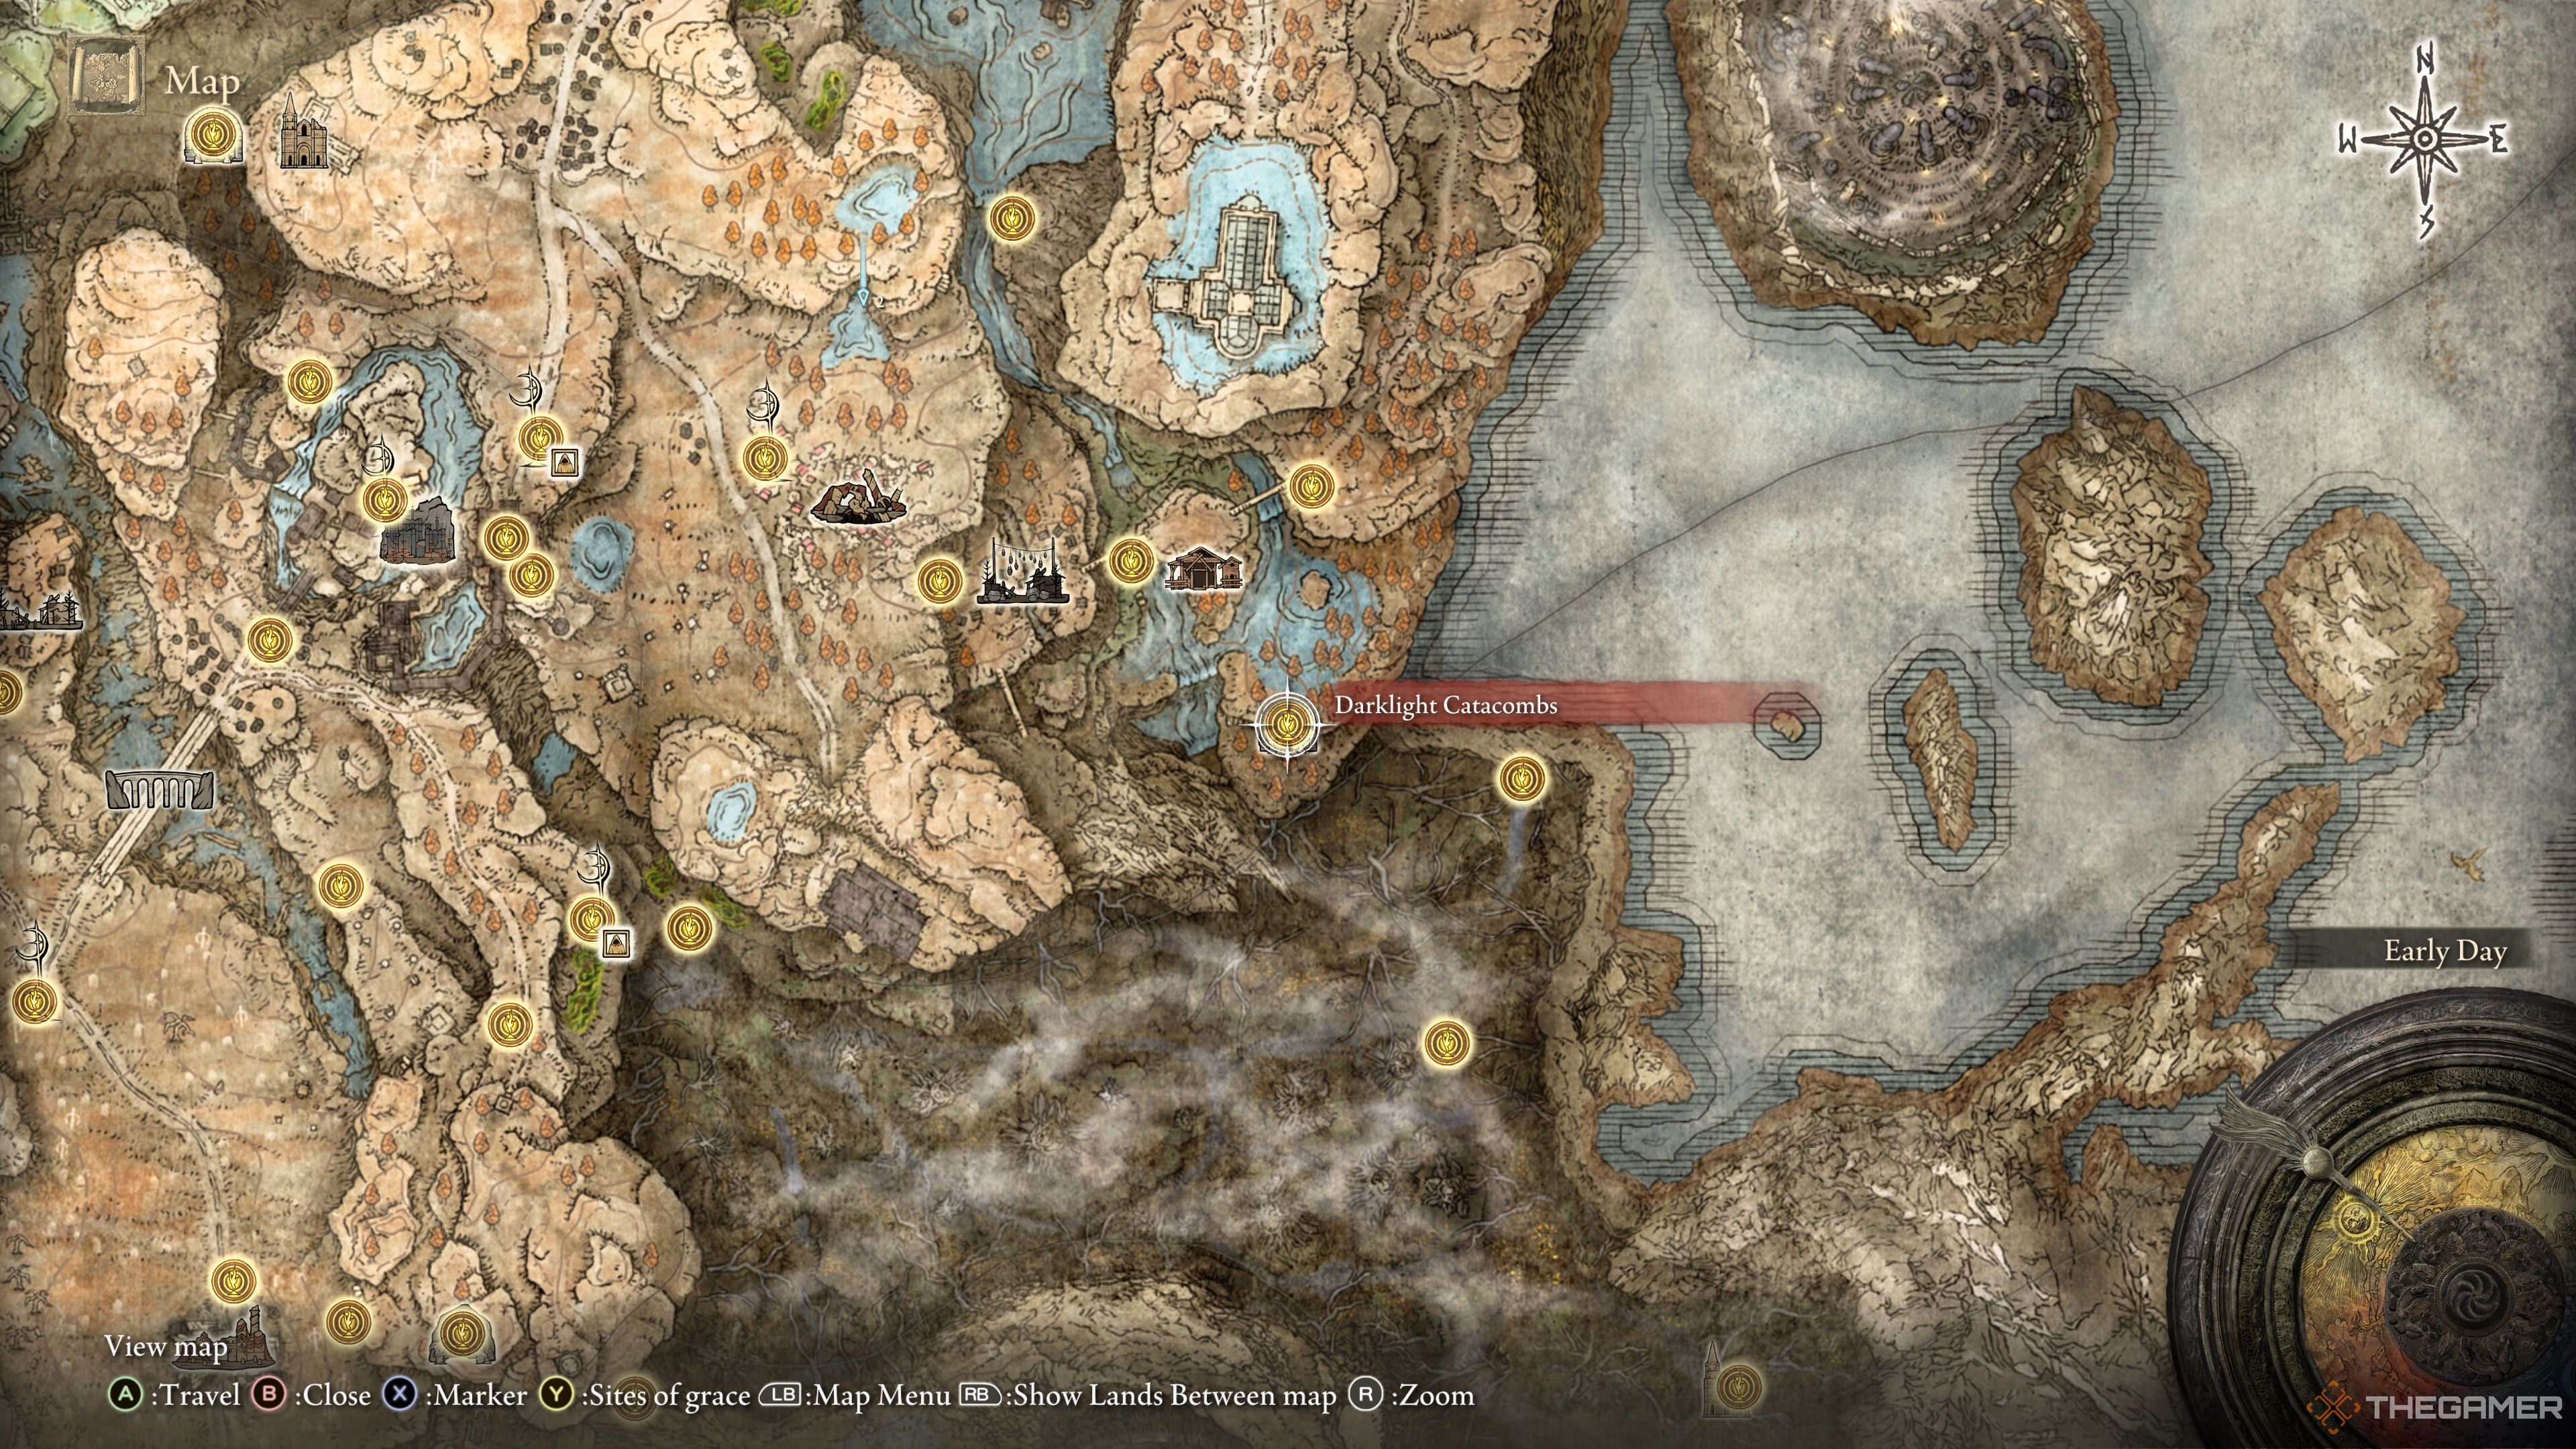 The Darklight Catacombs on the map in Elden Ring:Shadow Of The Erdtree.